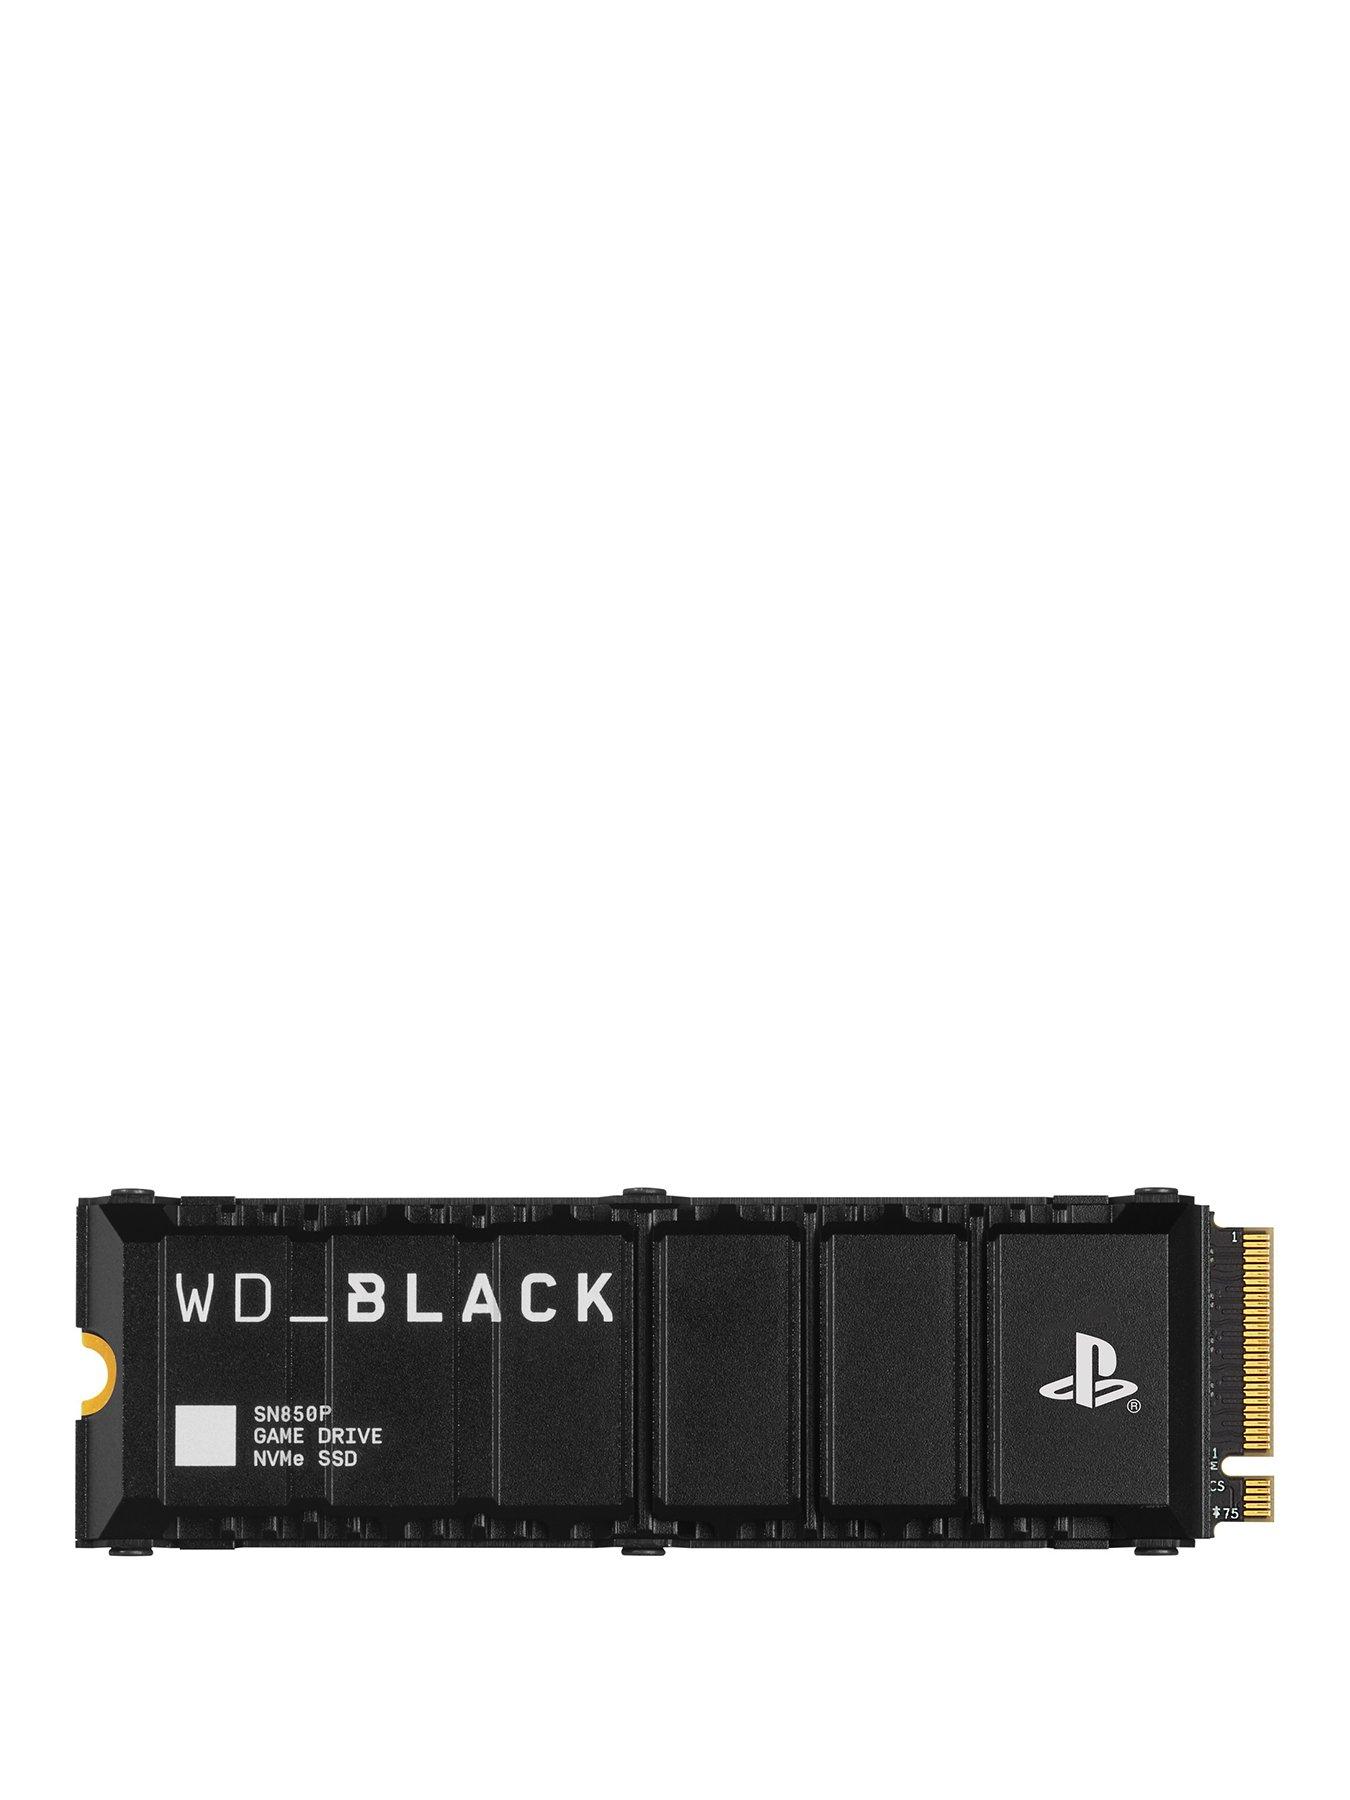 Western Digital WD_BLACK 1TB SN850P SSD with Heatsink for PS5 Licensed